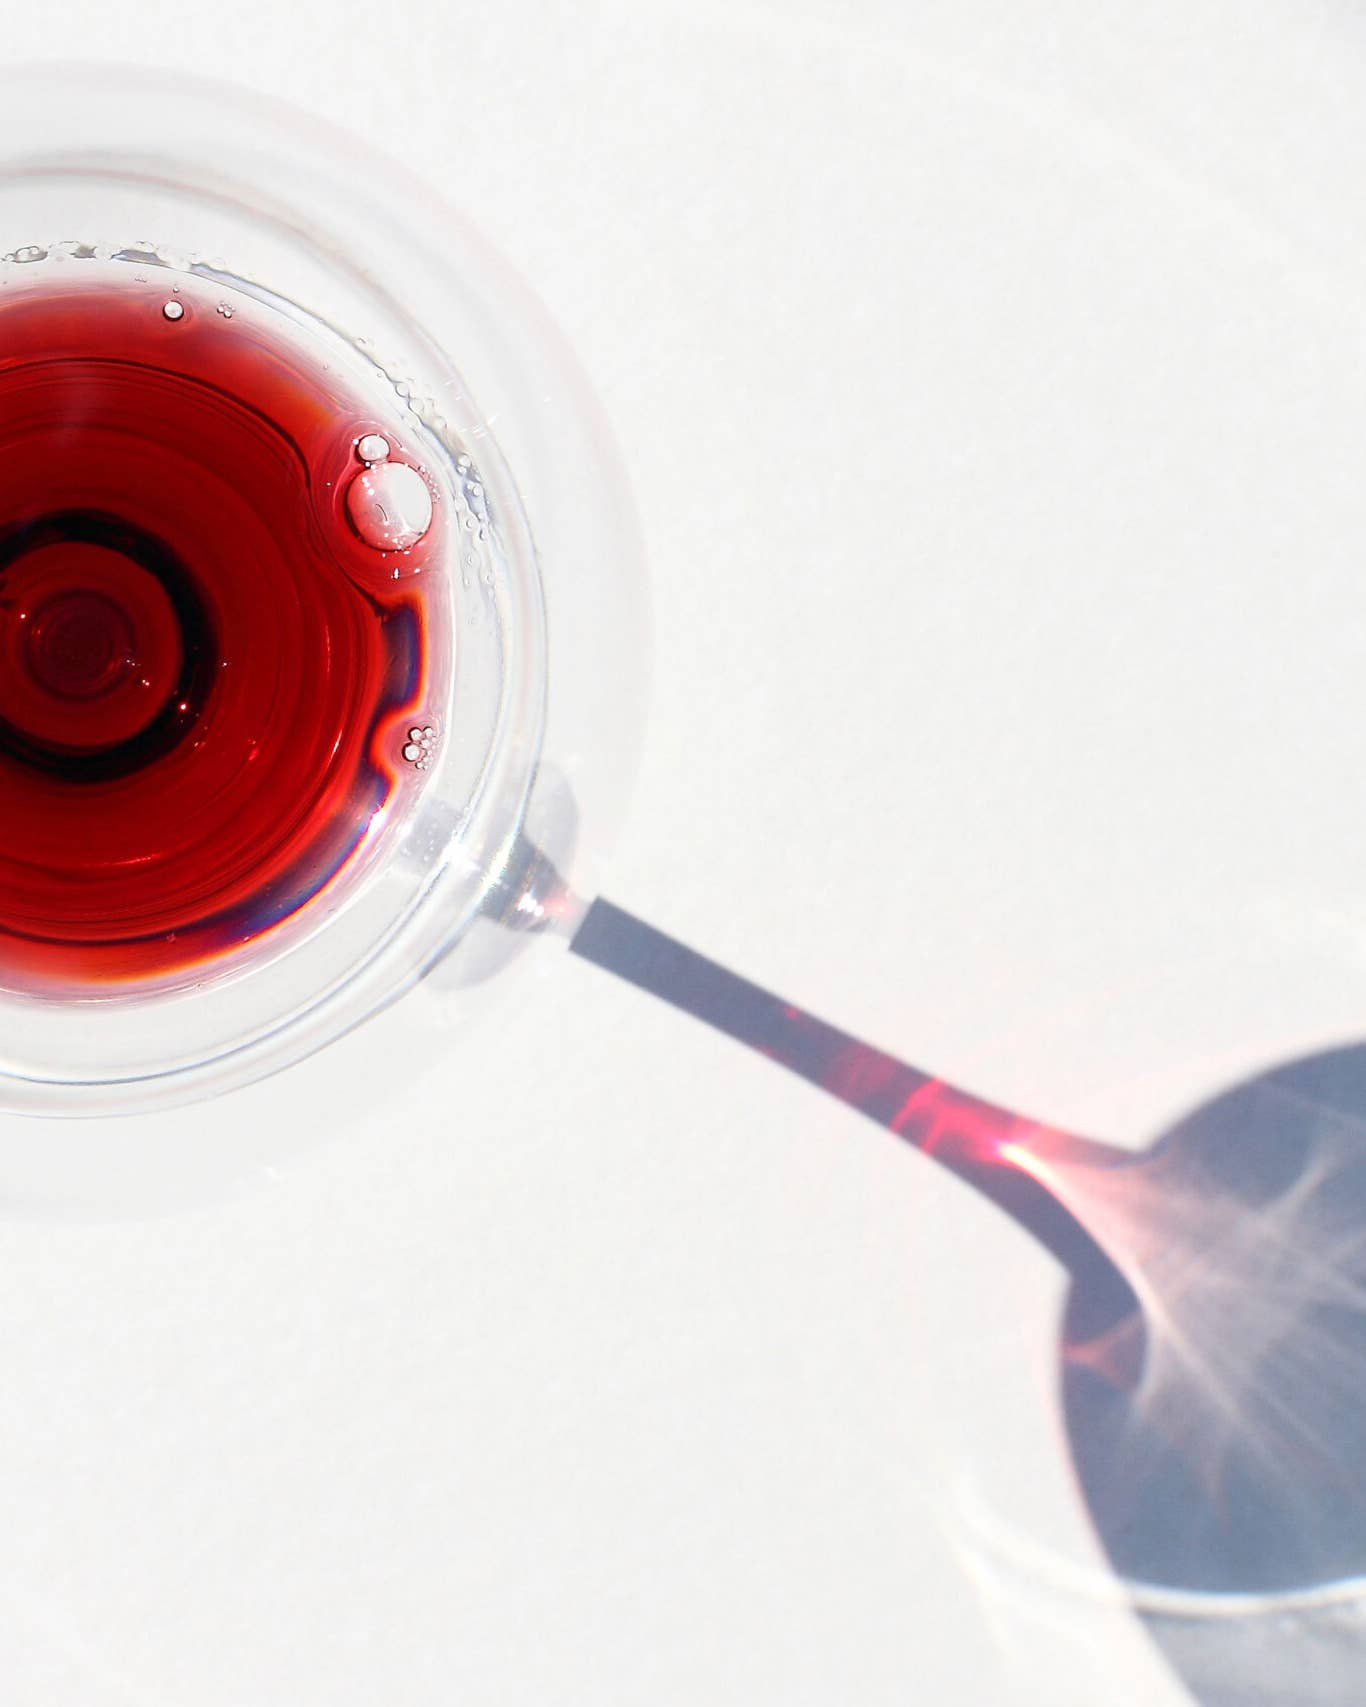 Somms and Beverage Directors Spill On Their 6 Best Red Wine Glasses